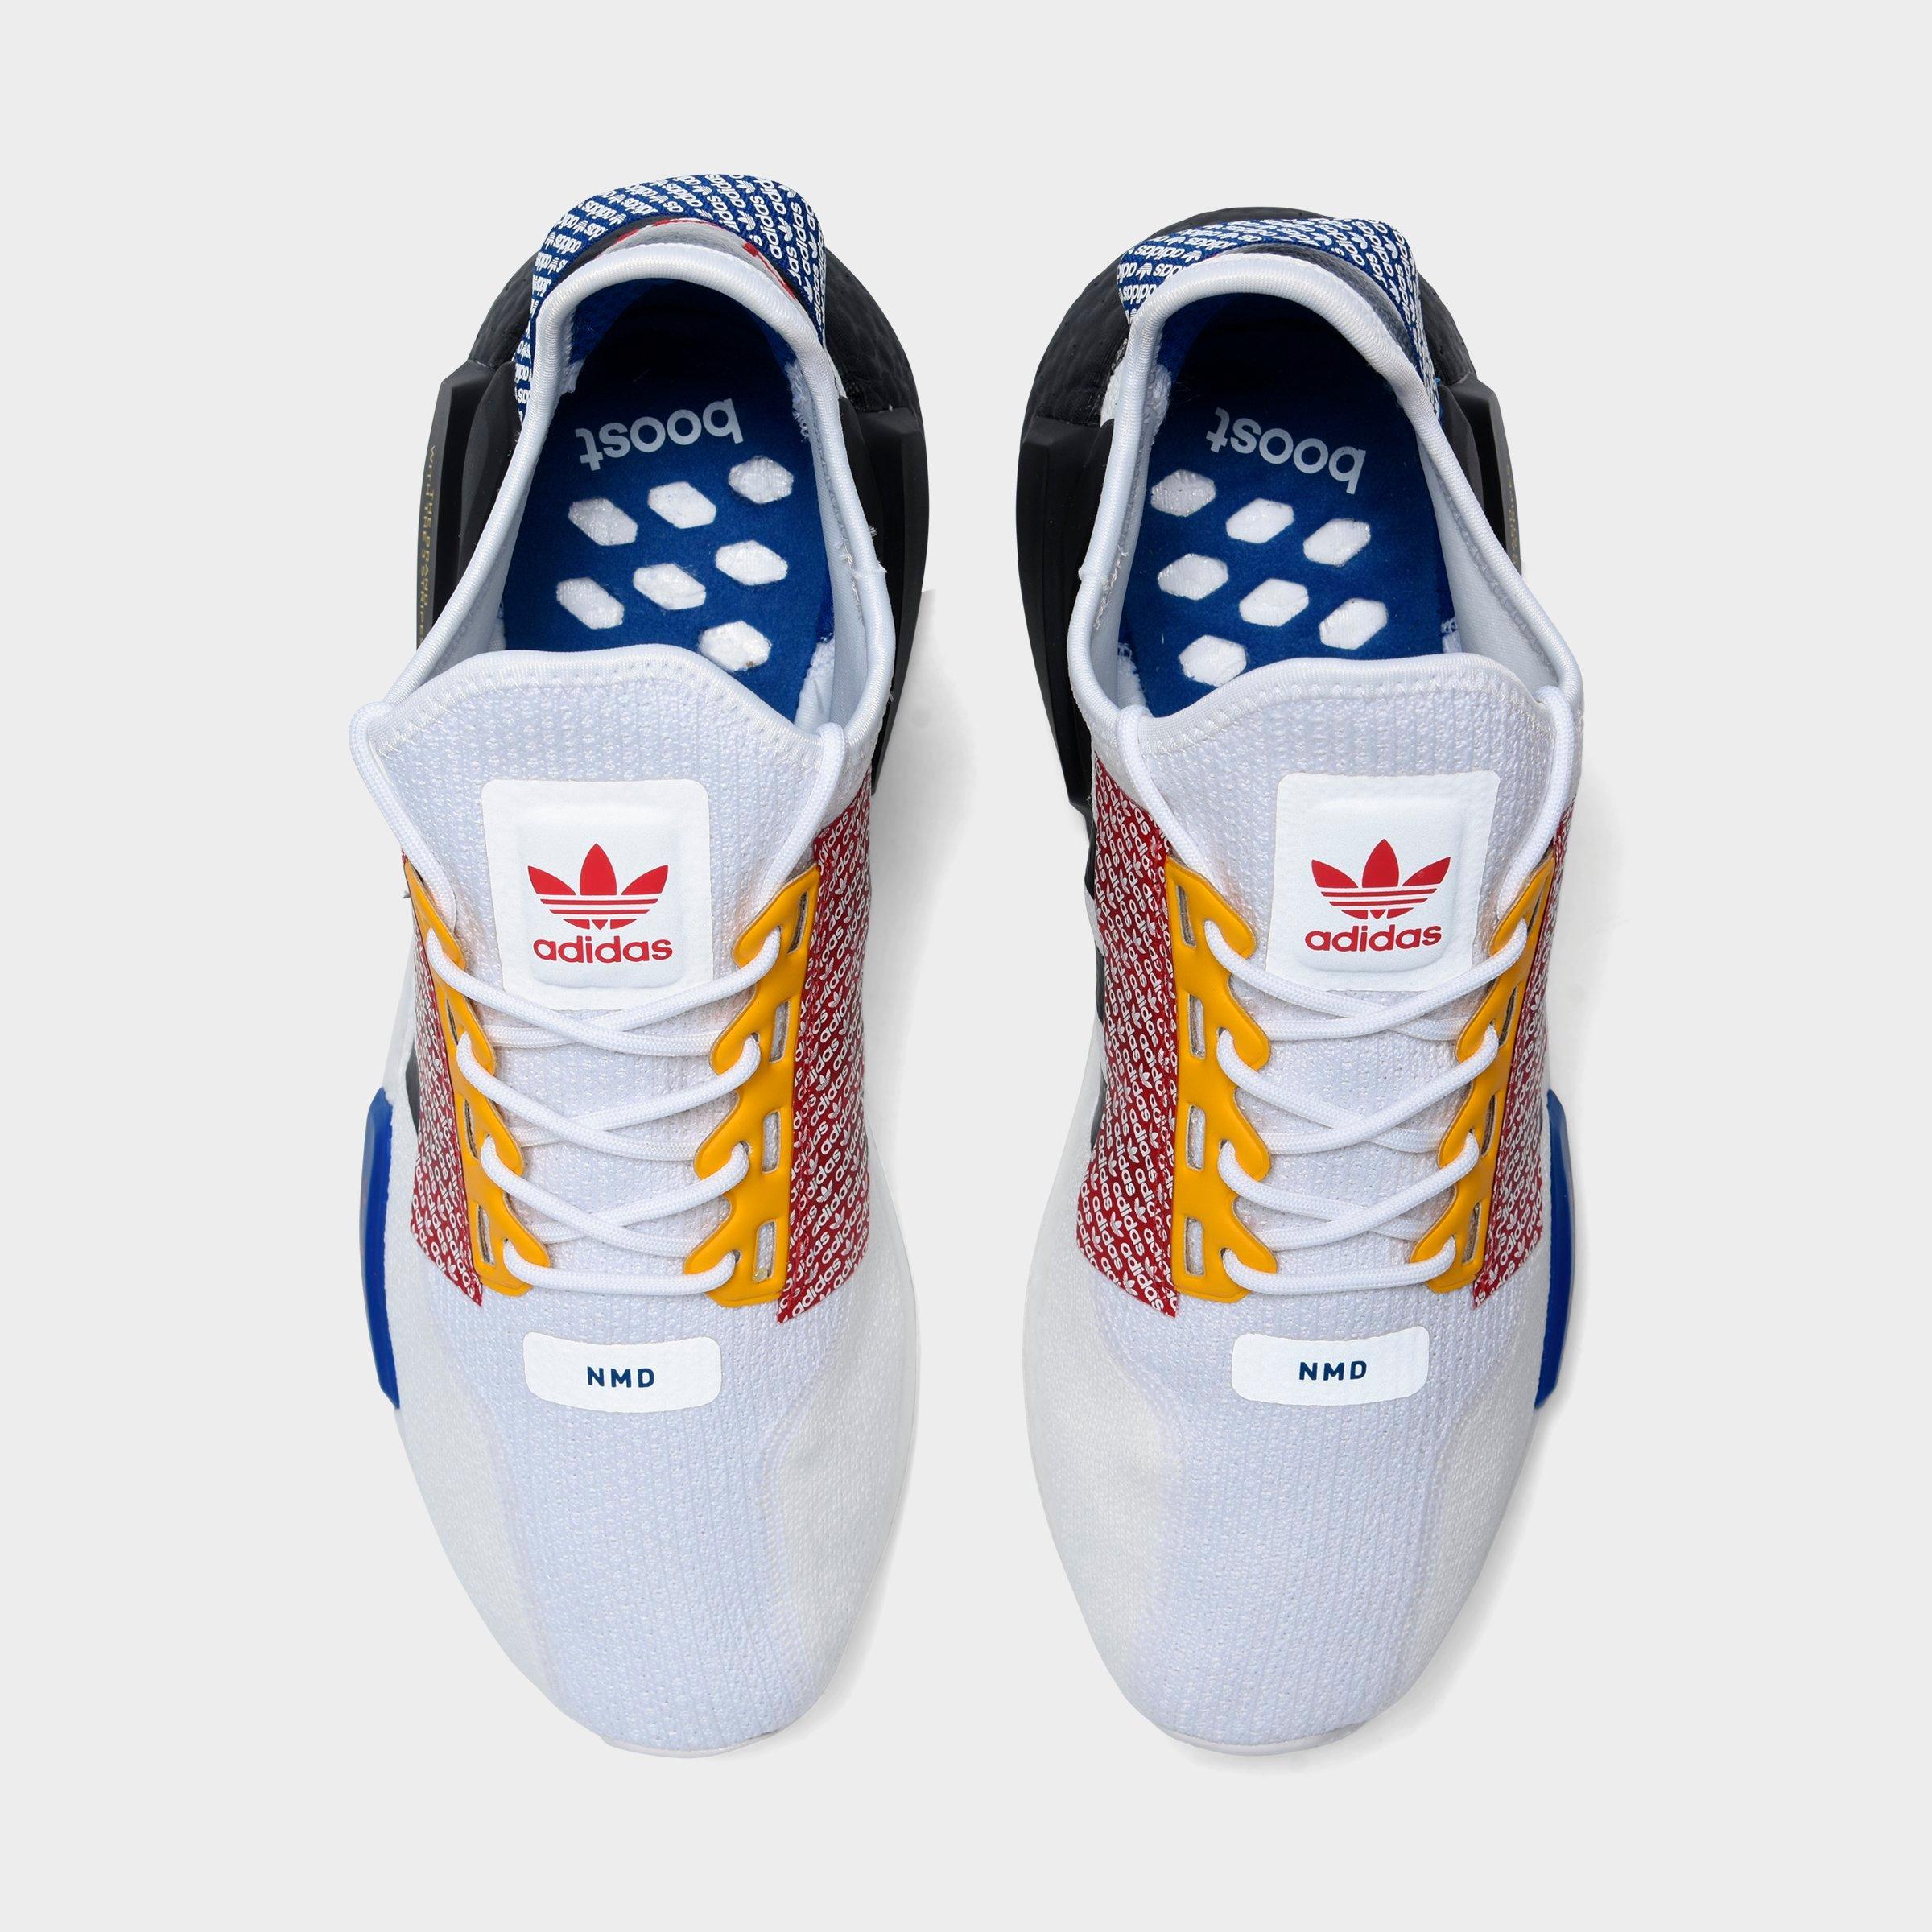 men's nmd r1 v2 casual sneakers